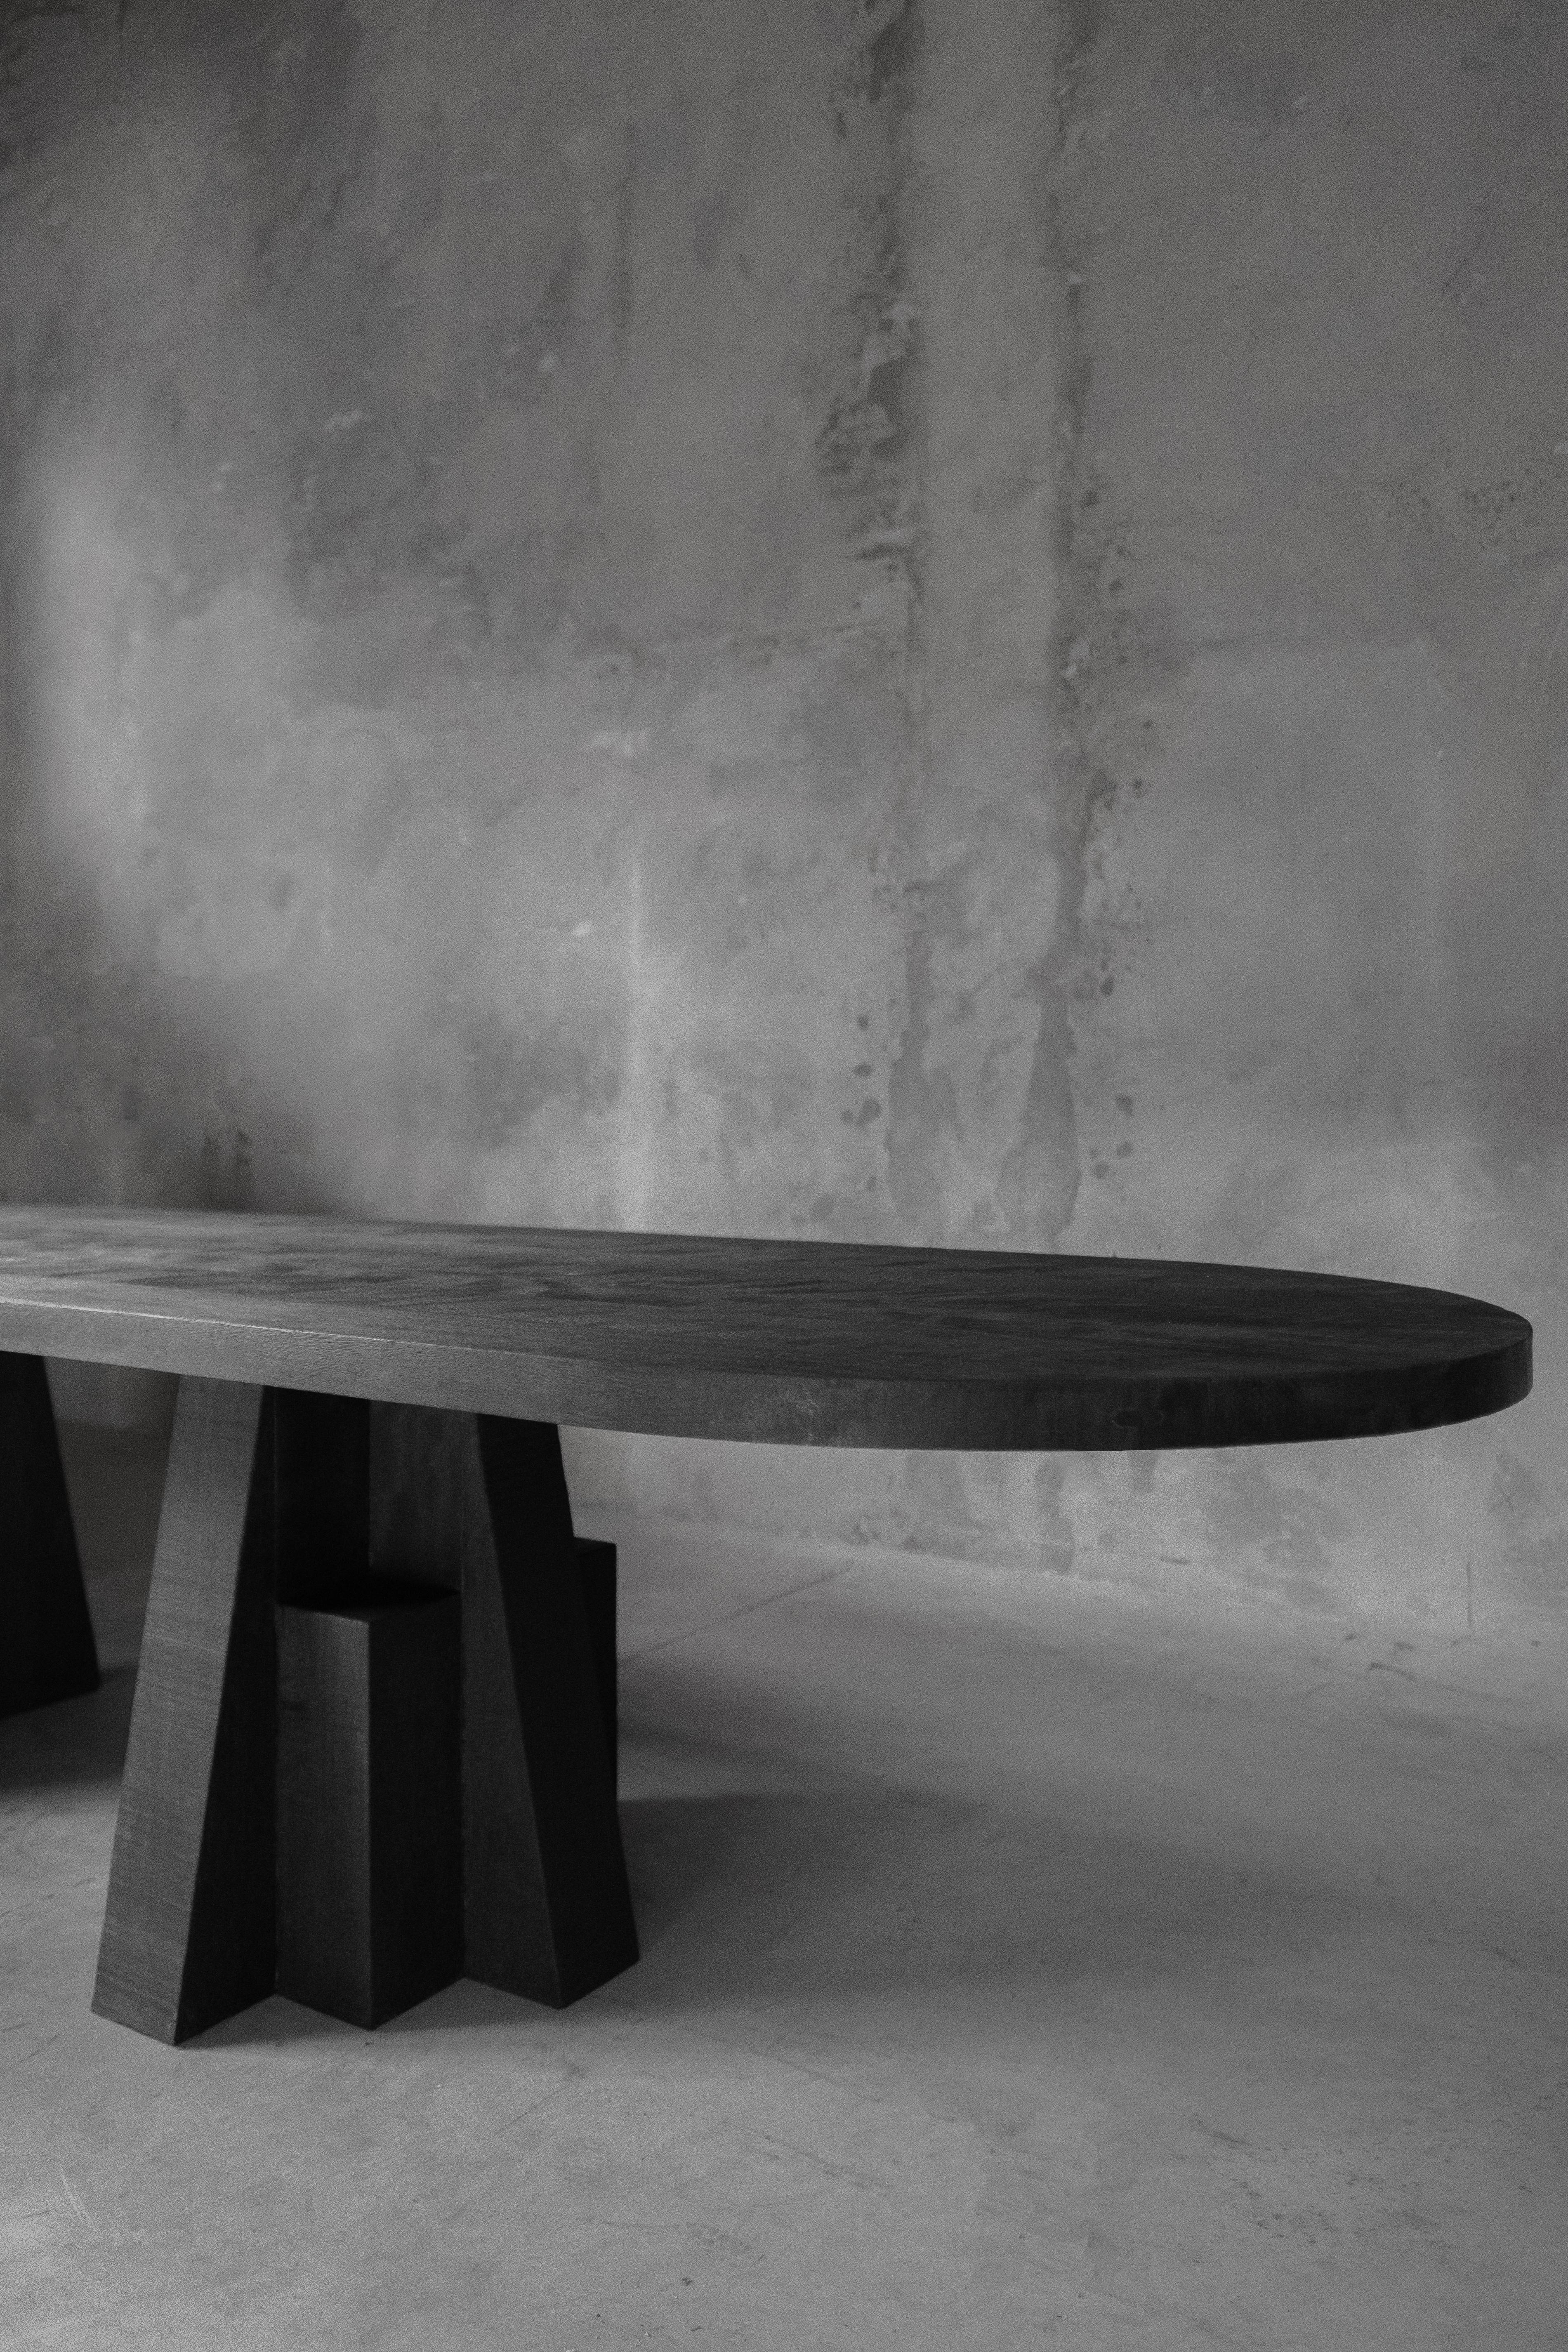 AD black Iroko Wood dining table, hand-sculpted, signed Arno Declercq
AD Table 2.0
Measures: Small 340 cm W x 73 cm H x 105 cm D, 133.86” W x 28.7” H x 41.3” D
Large 340 cm W x 73 cm H x 120 cm D, 133.86” W x 28.7” H x 47.2” D
Iroko wood , walnut